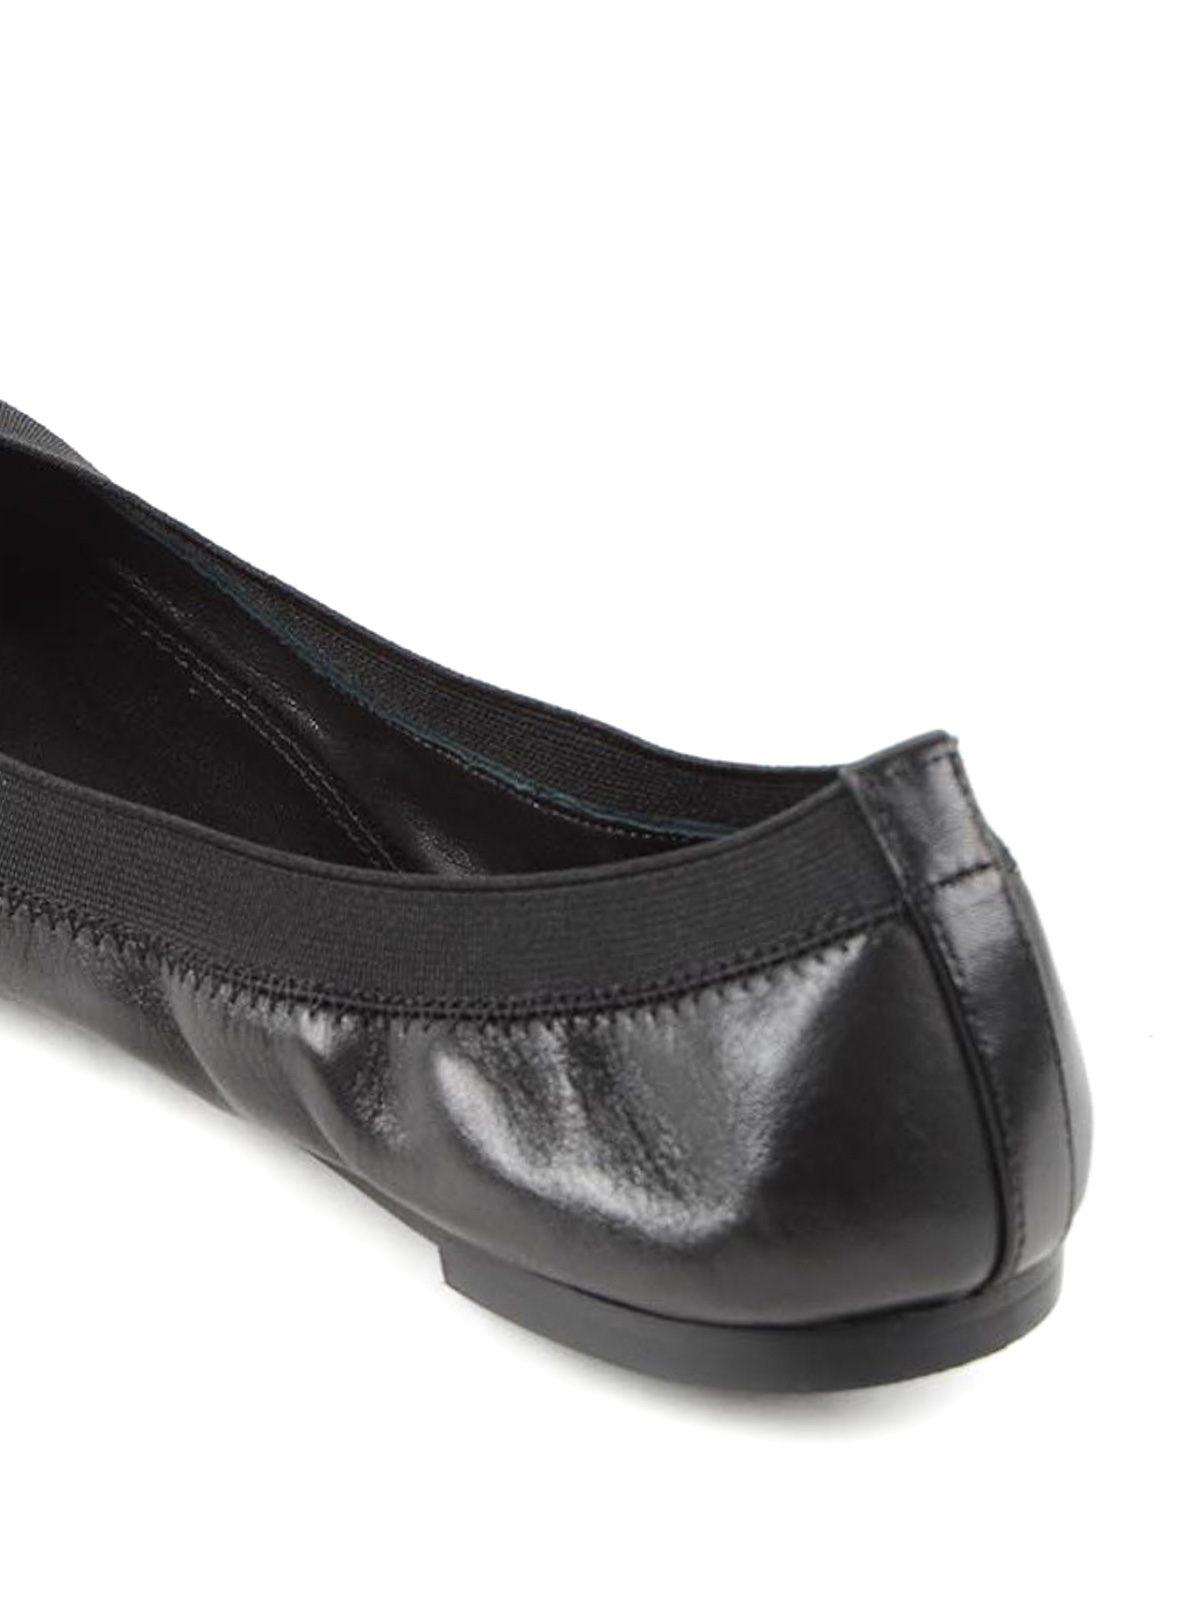 Flat shoes Tory Burch - Patent leather toe Jolie ballerinas - 30938001